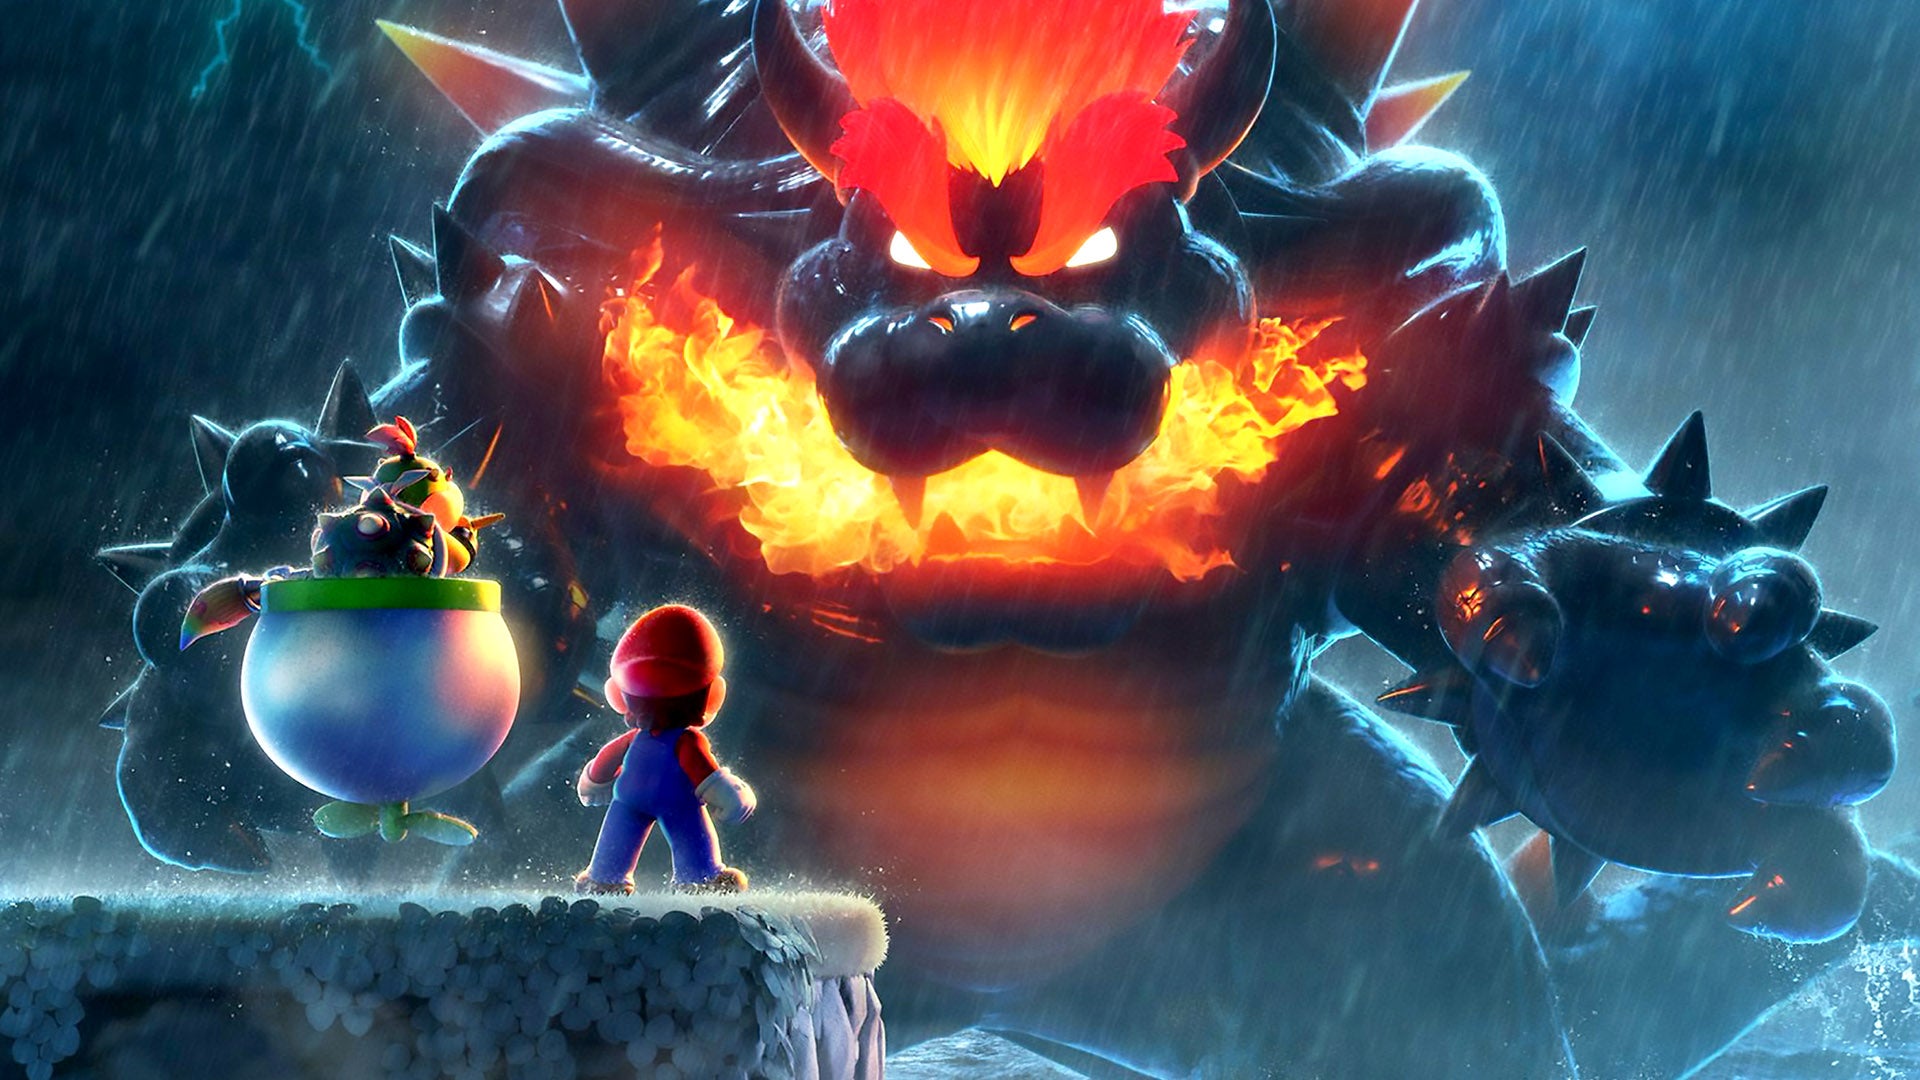 Image for Super Mario 3D World + Bowser's Fury Switch - The DF Tech Review